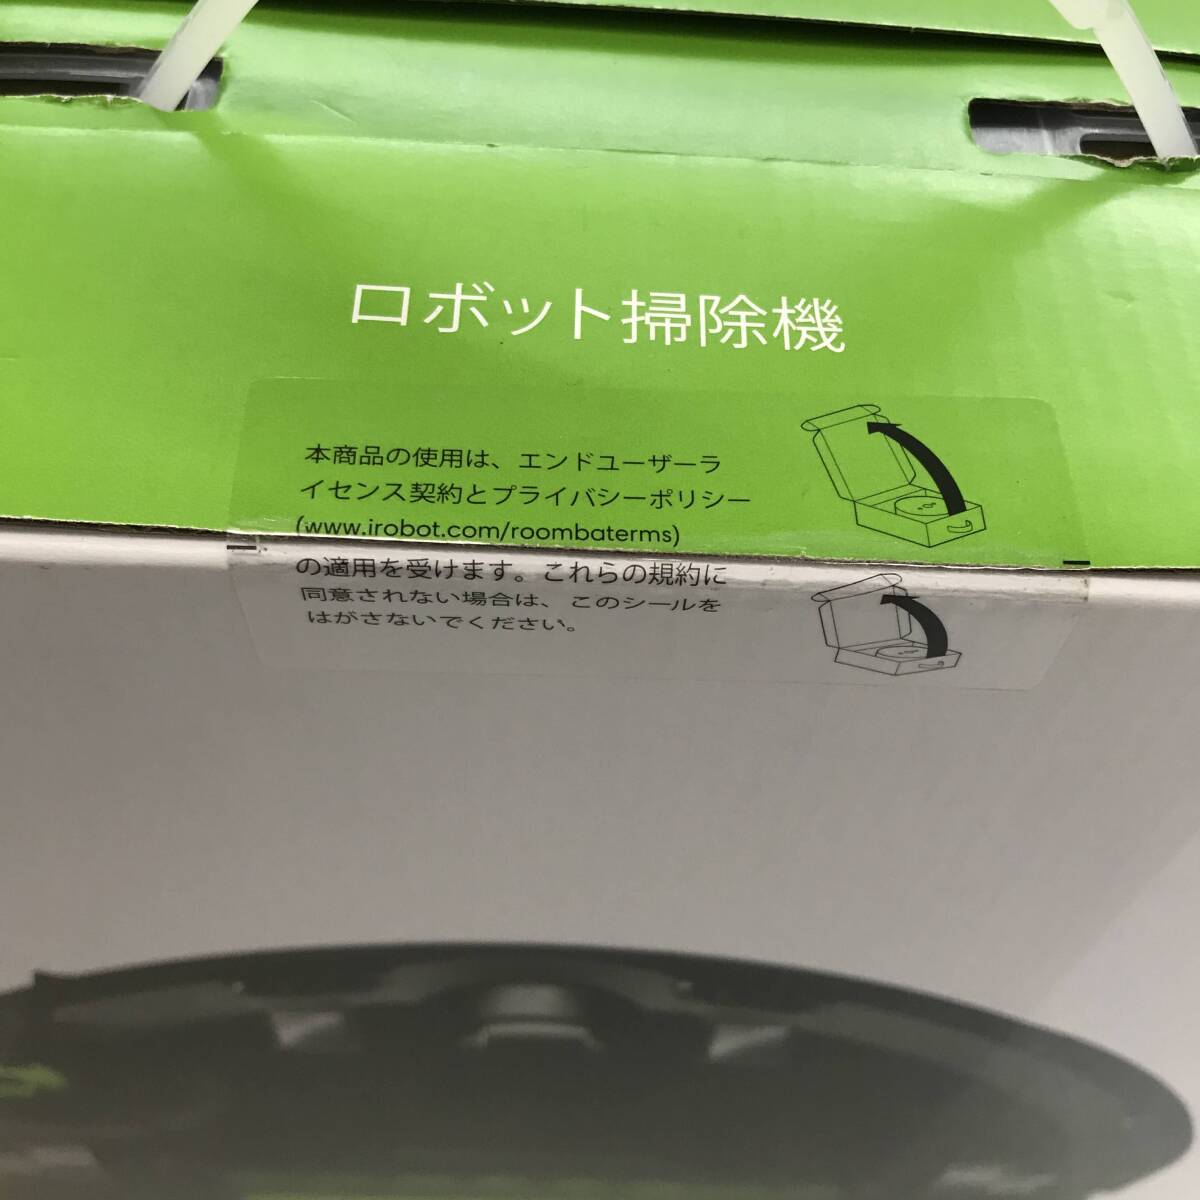 No.5796 *1 jpy ~ [ robot vacuum cleaner ] Robot Roomba robot roomba absence middle cleaning clean guarantee . floor cleaning from opening beautiful part shop pet secondhand goods 